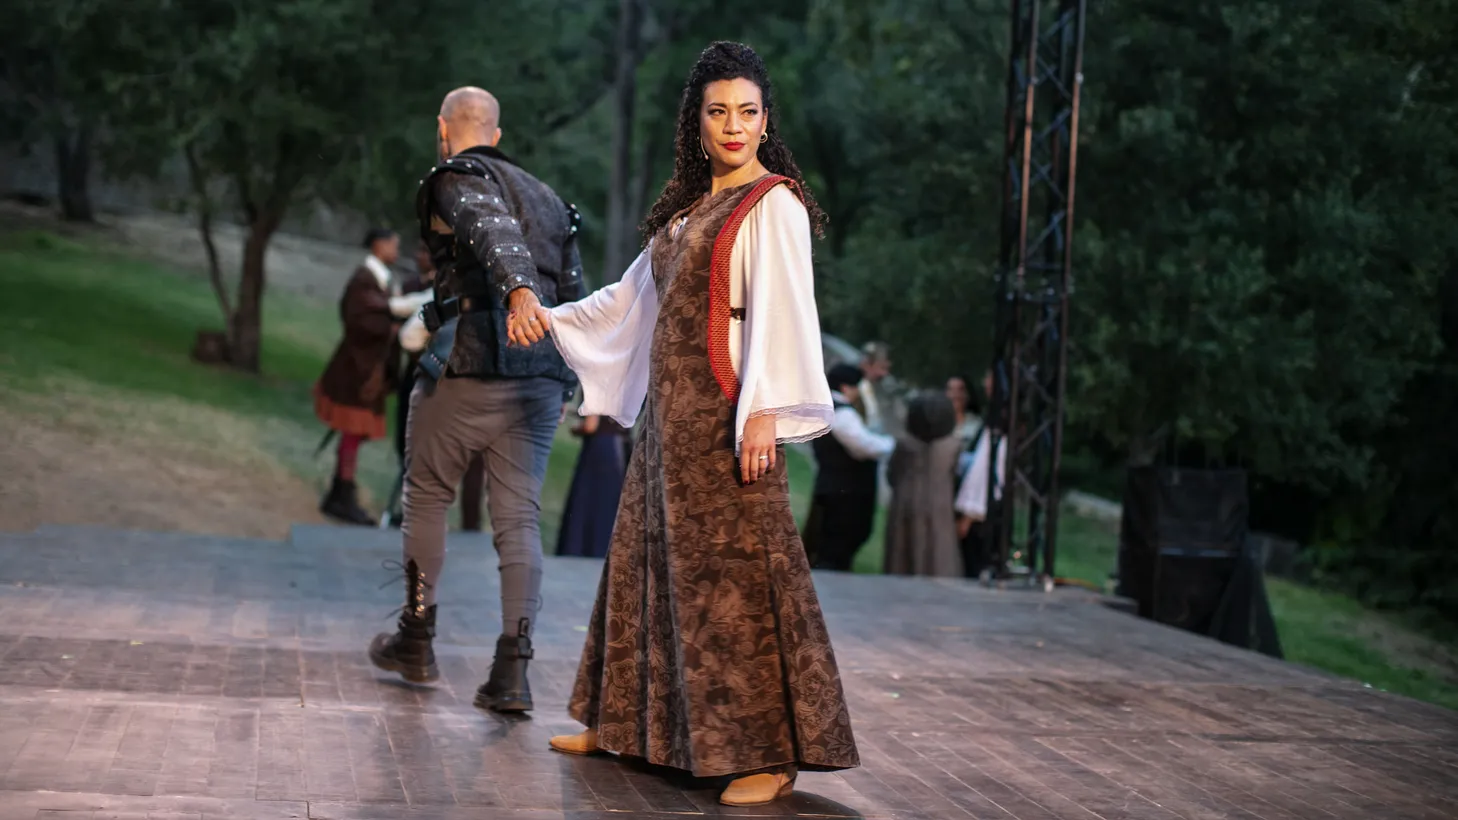 Kalean Ung plays Lady Macbeth during this year’s Griffith Park Free Shakespeare Festival.